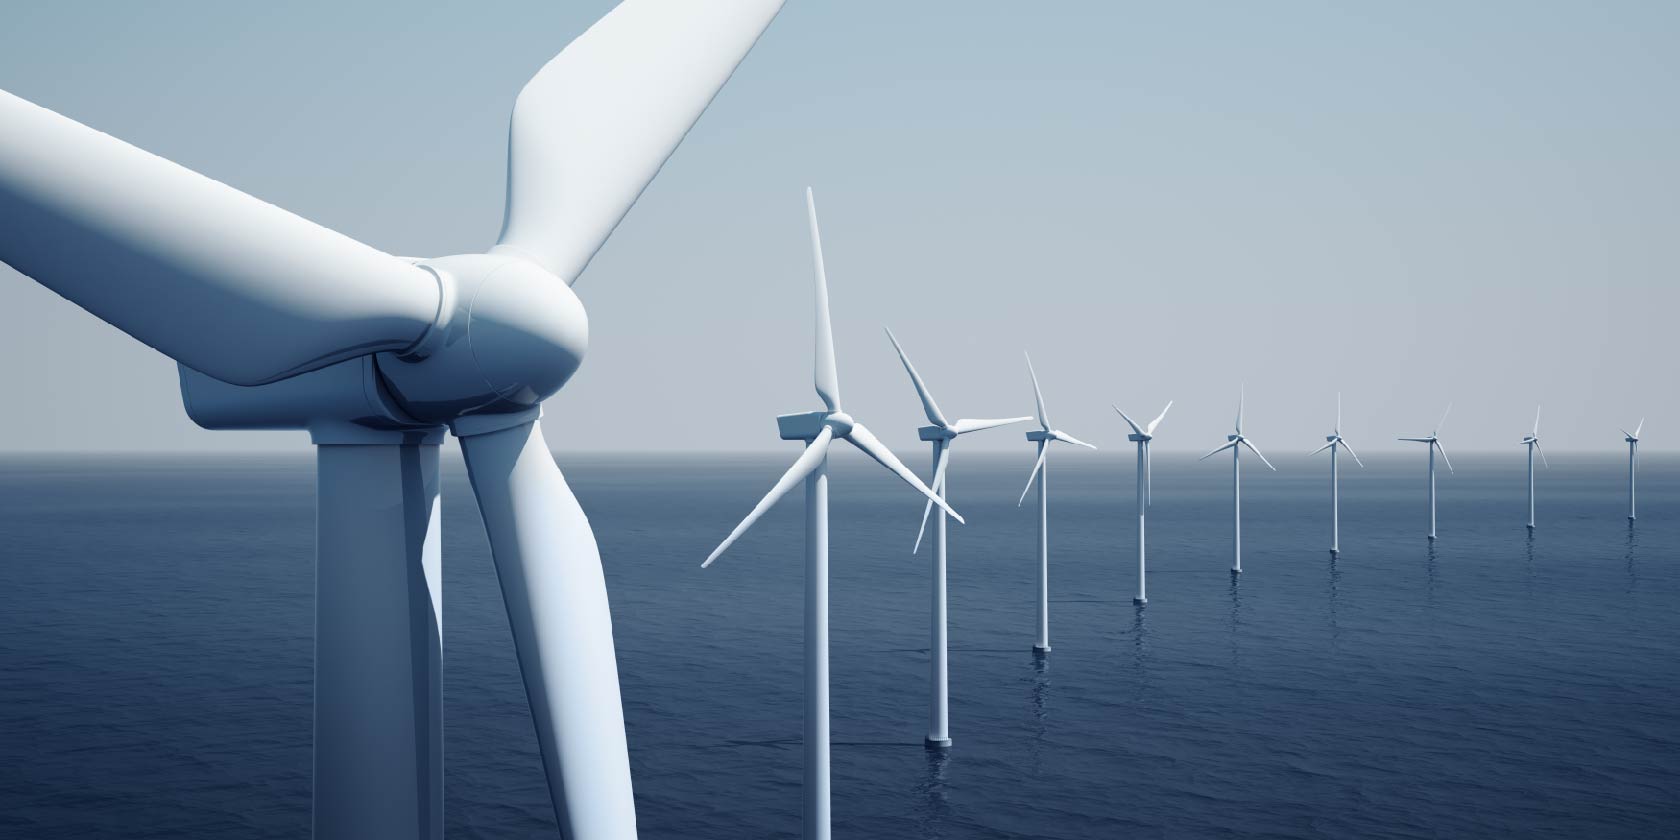 Material Usage in Wind Turbine Blades - The Global Market 2023